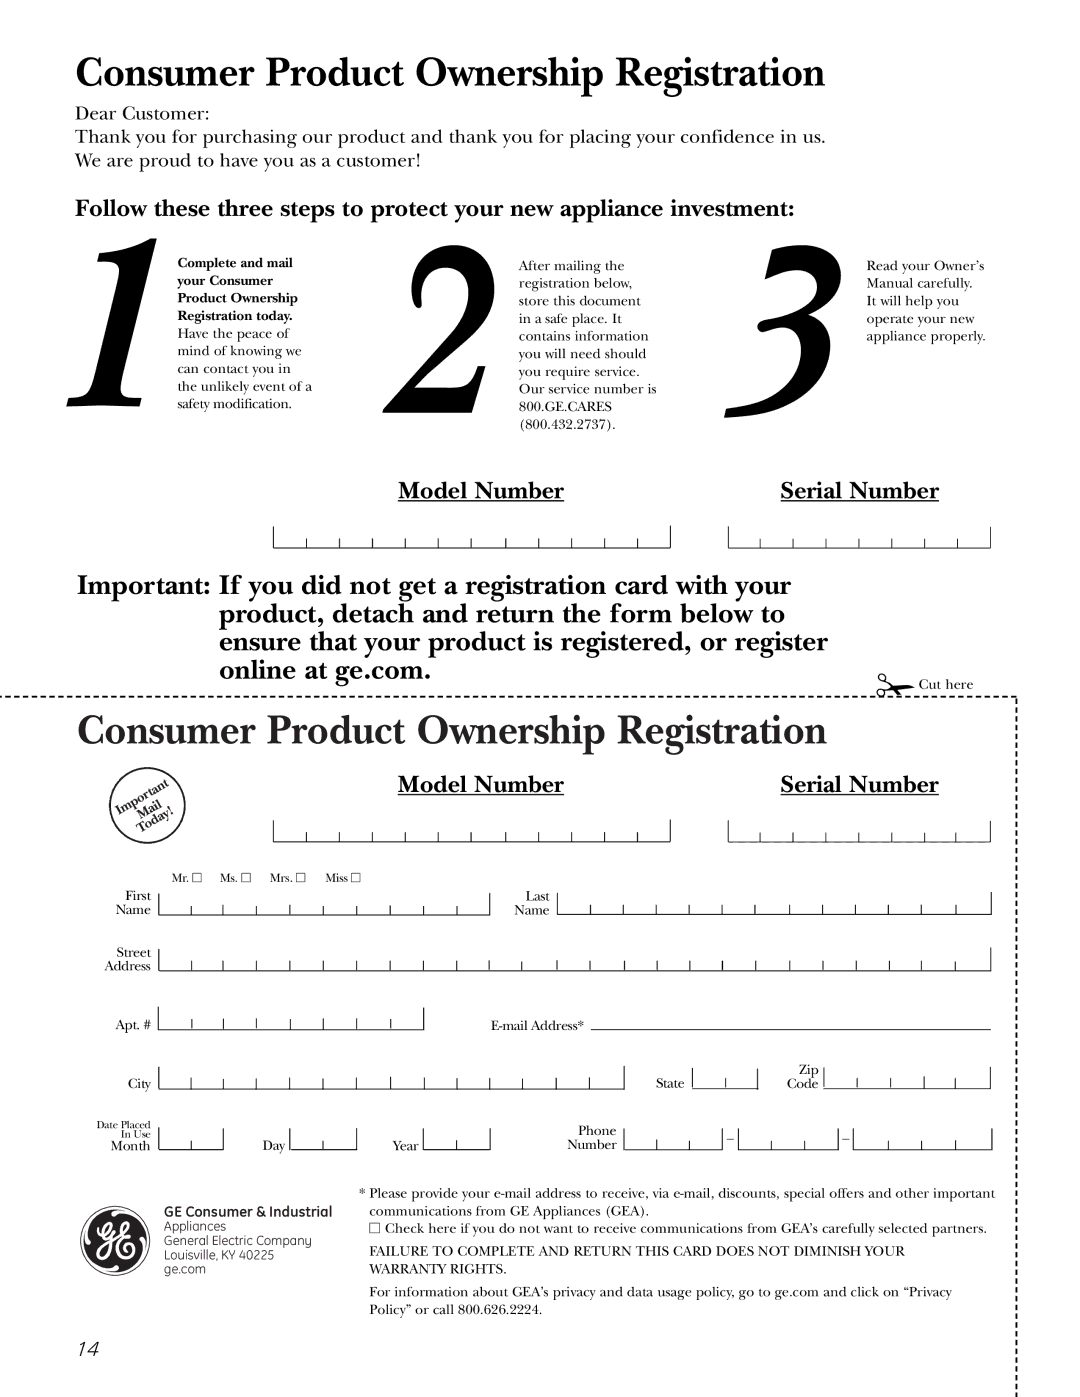 GE WineChiller installation instructions Consumer Product Ownership Registration 